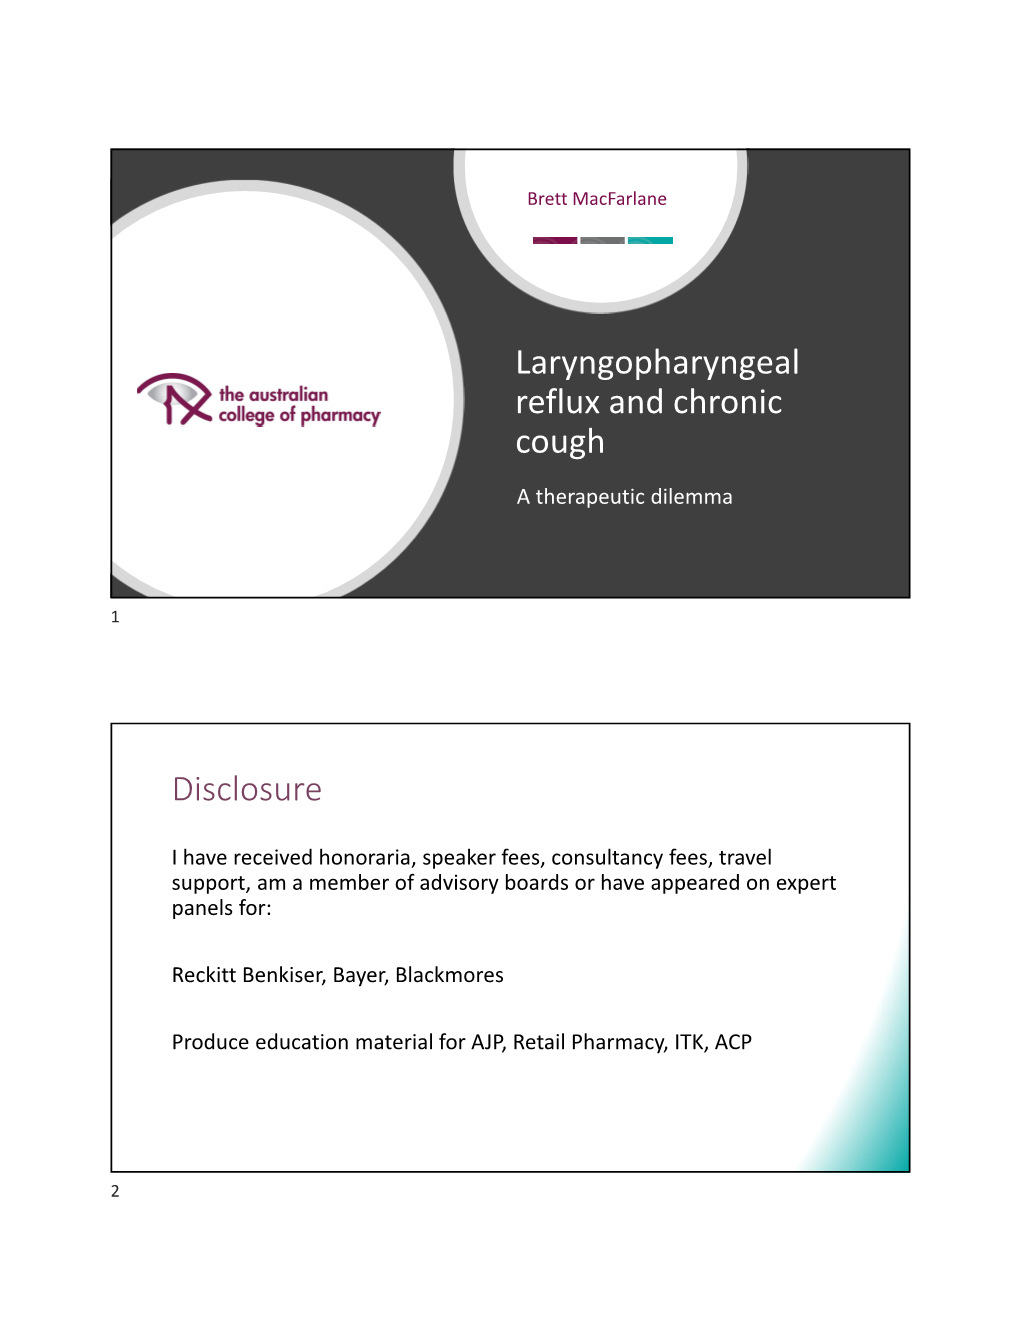 Laryngopharyngeal Reflux and Chronic Cough Disclosure